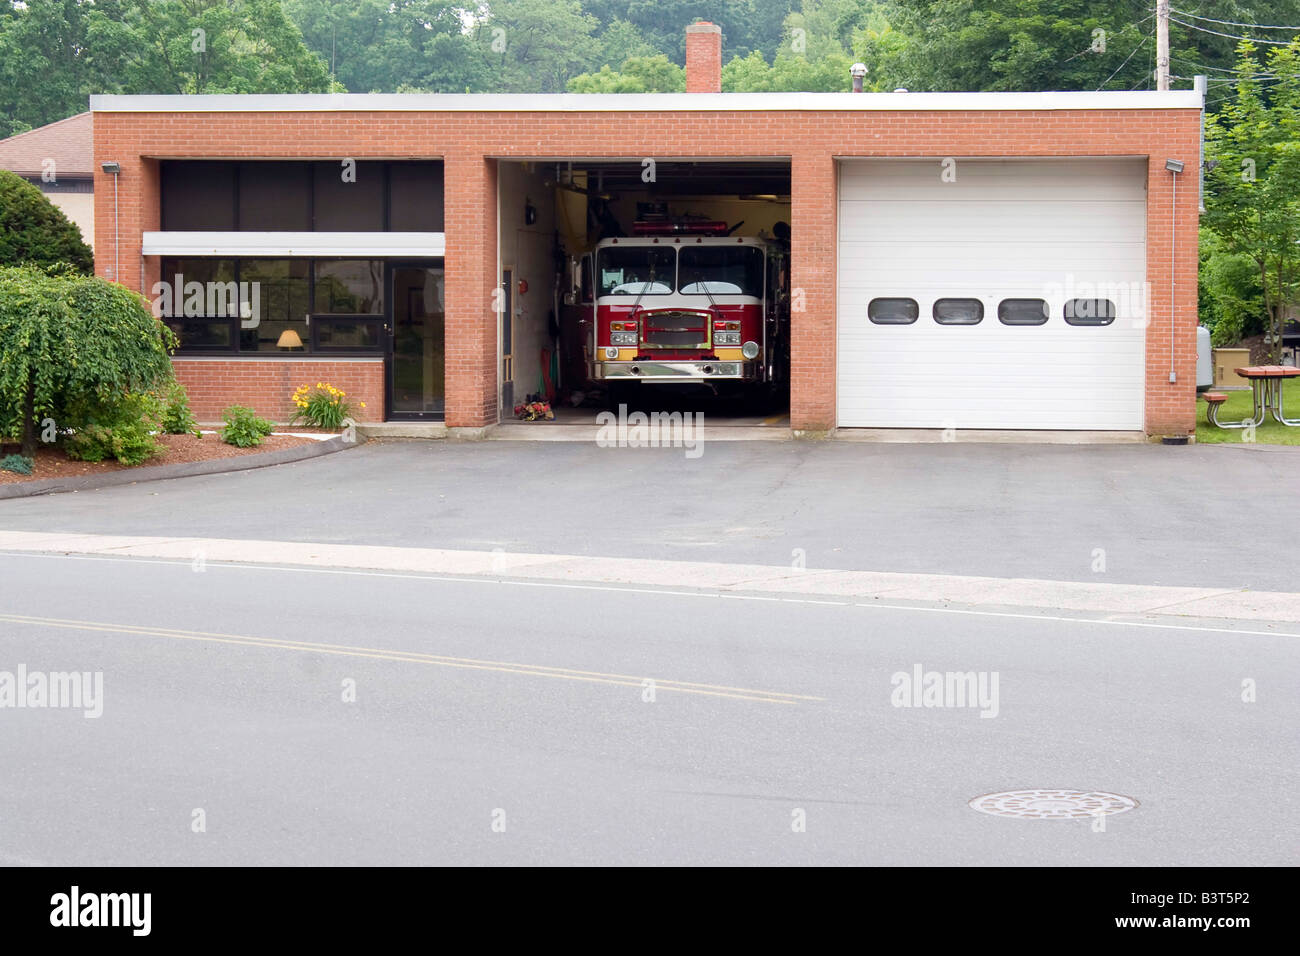 A small fire house with two garage bays Stock Photo